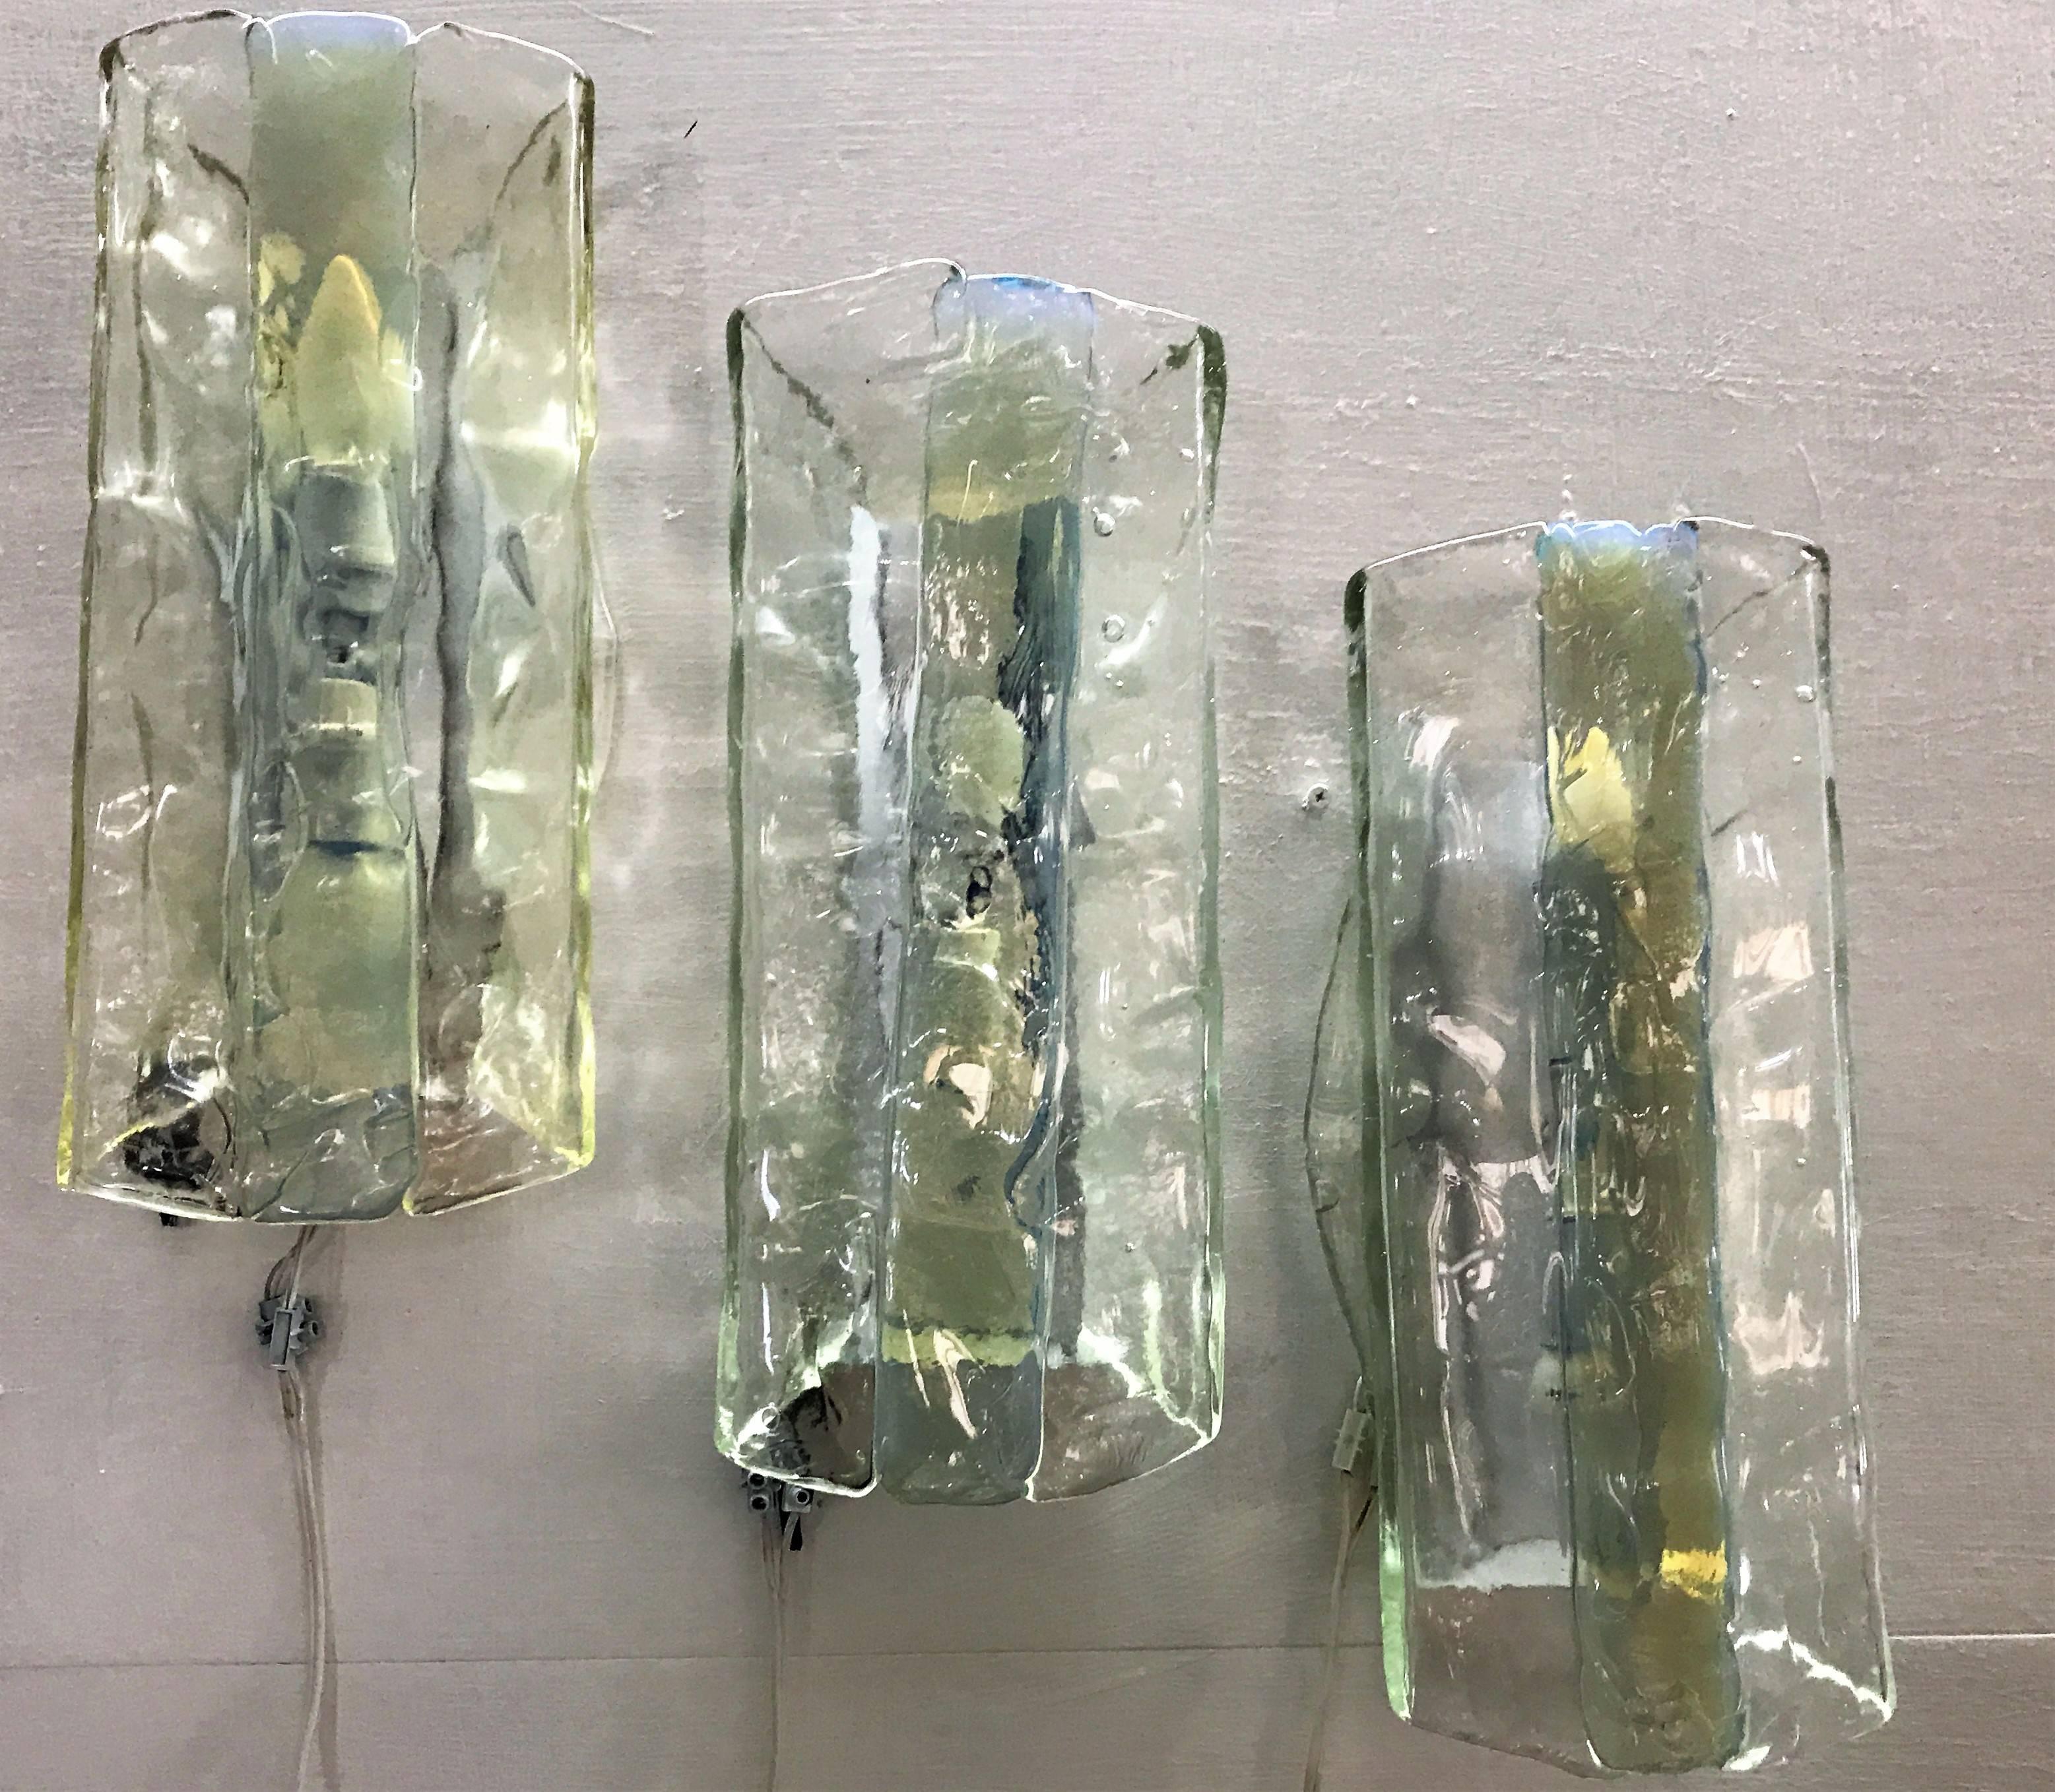 Mid-Century Modern sconces by Fratelli Toso in clear and opalescent glass, MAREA model.
Nine available.